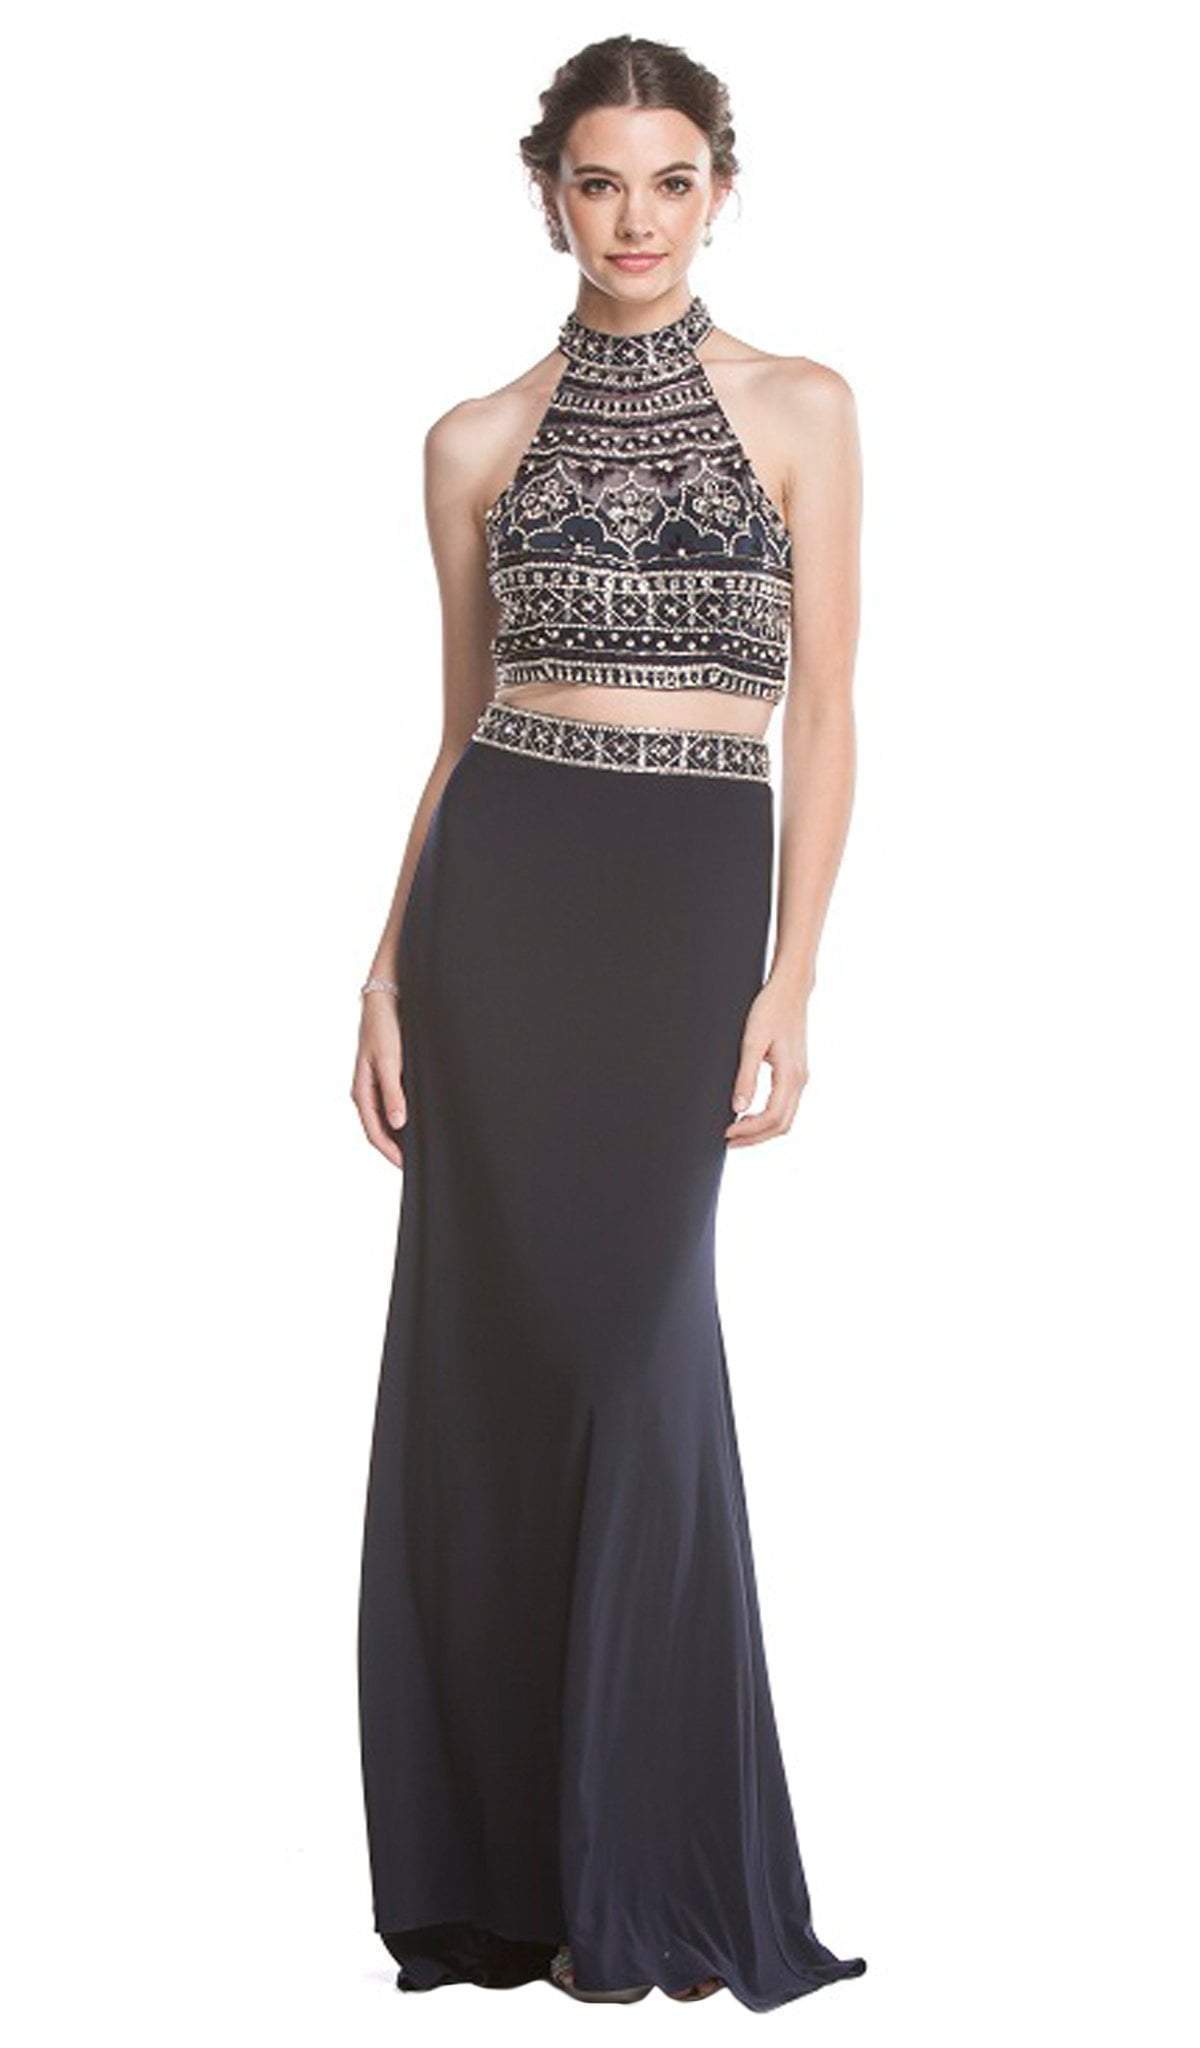 Aspeed Design - Two Piece Beaded High Halter Evening Gown
